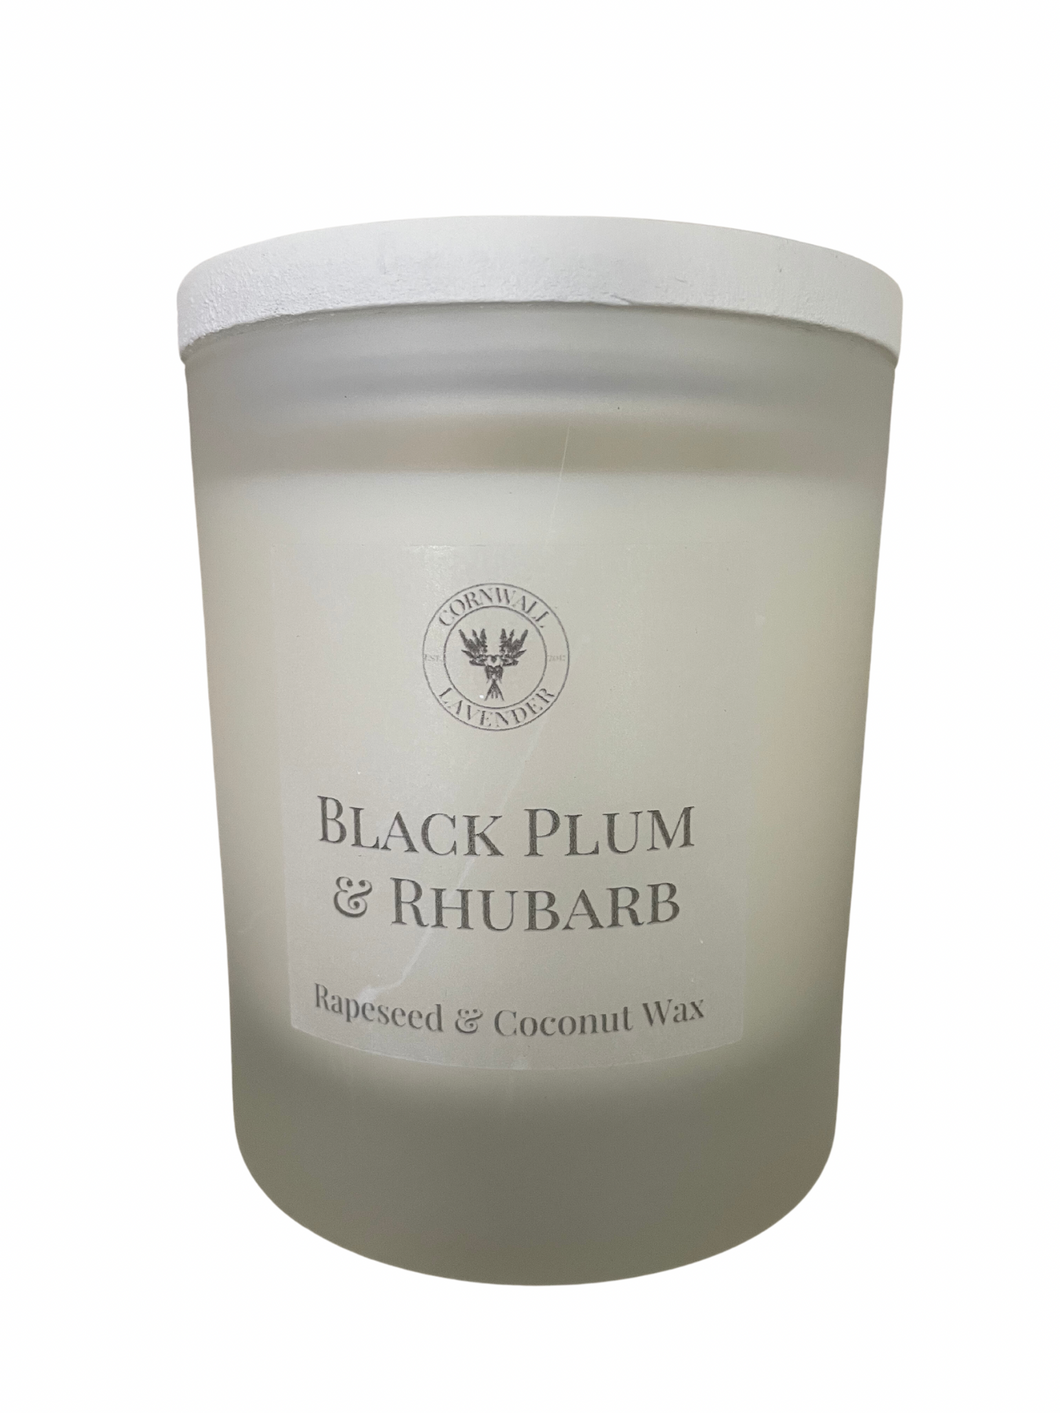 Black Plum & Rhubarb Frosted Glass Candle with lid. 30cl.